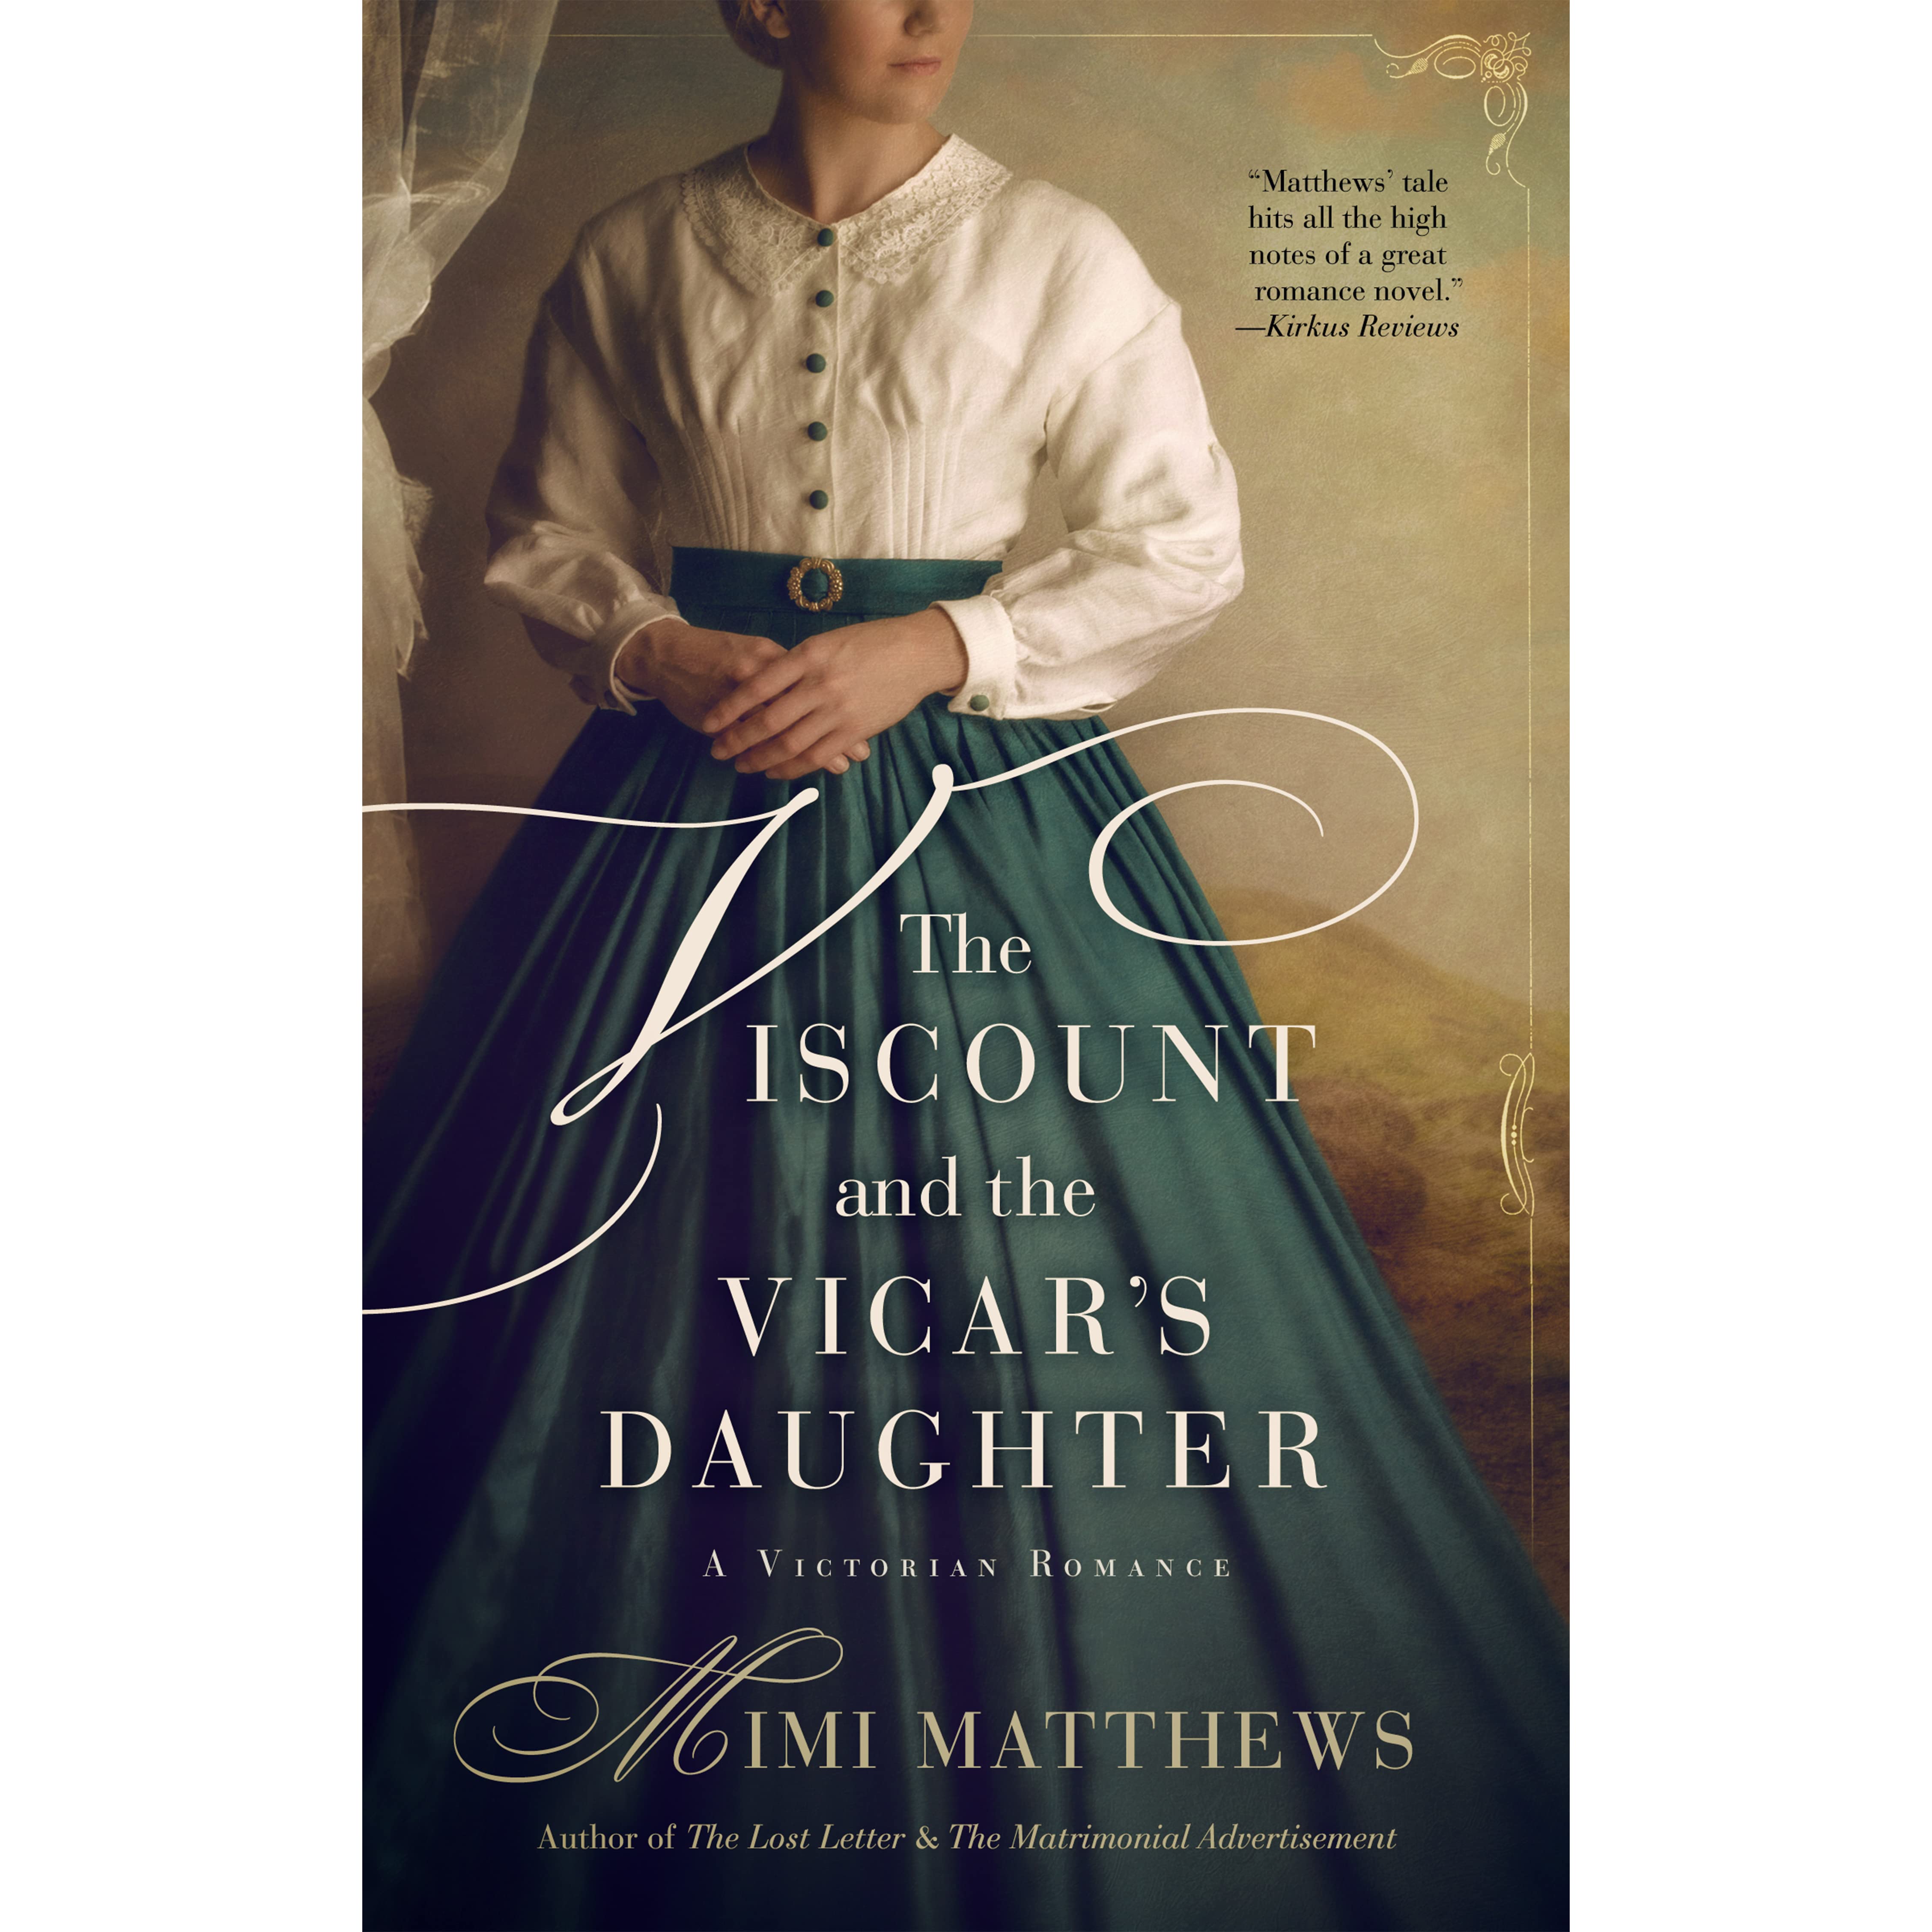 The Viscount and the Vicar's Daughter: A Victorian Romance